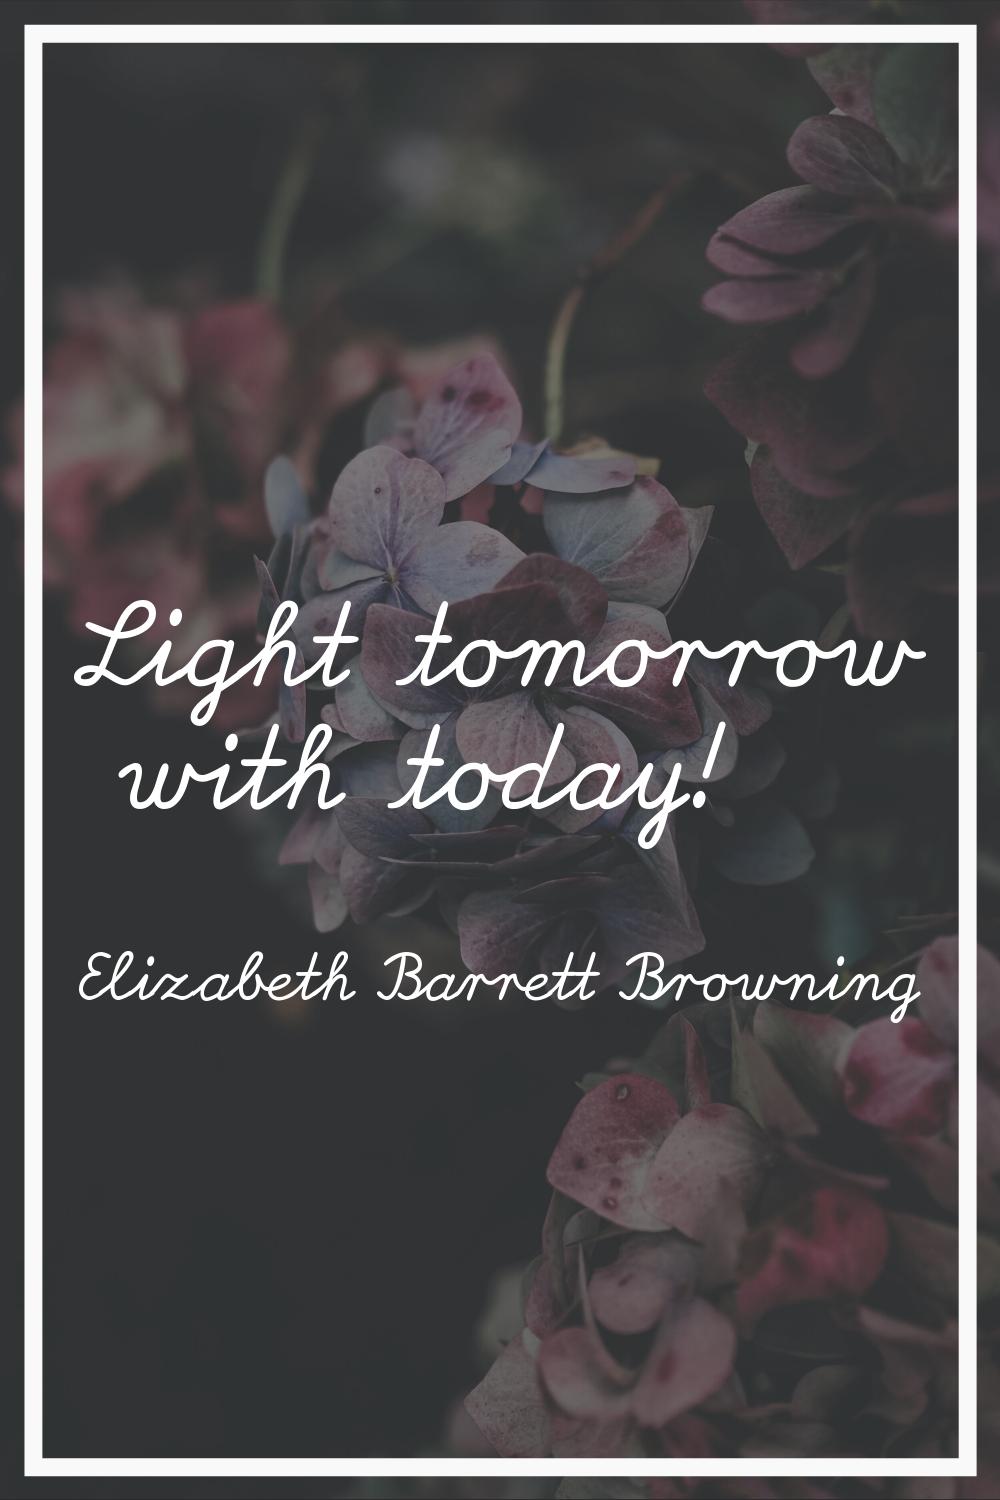 Light tomorrow with today!